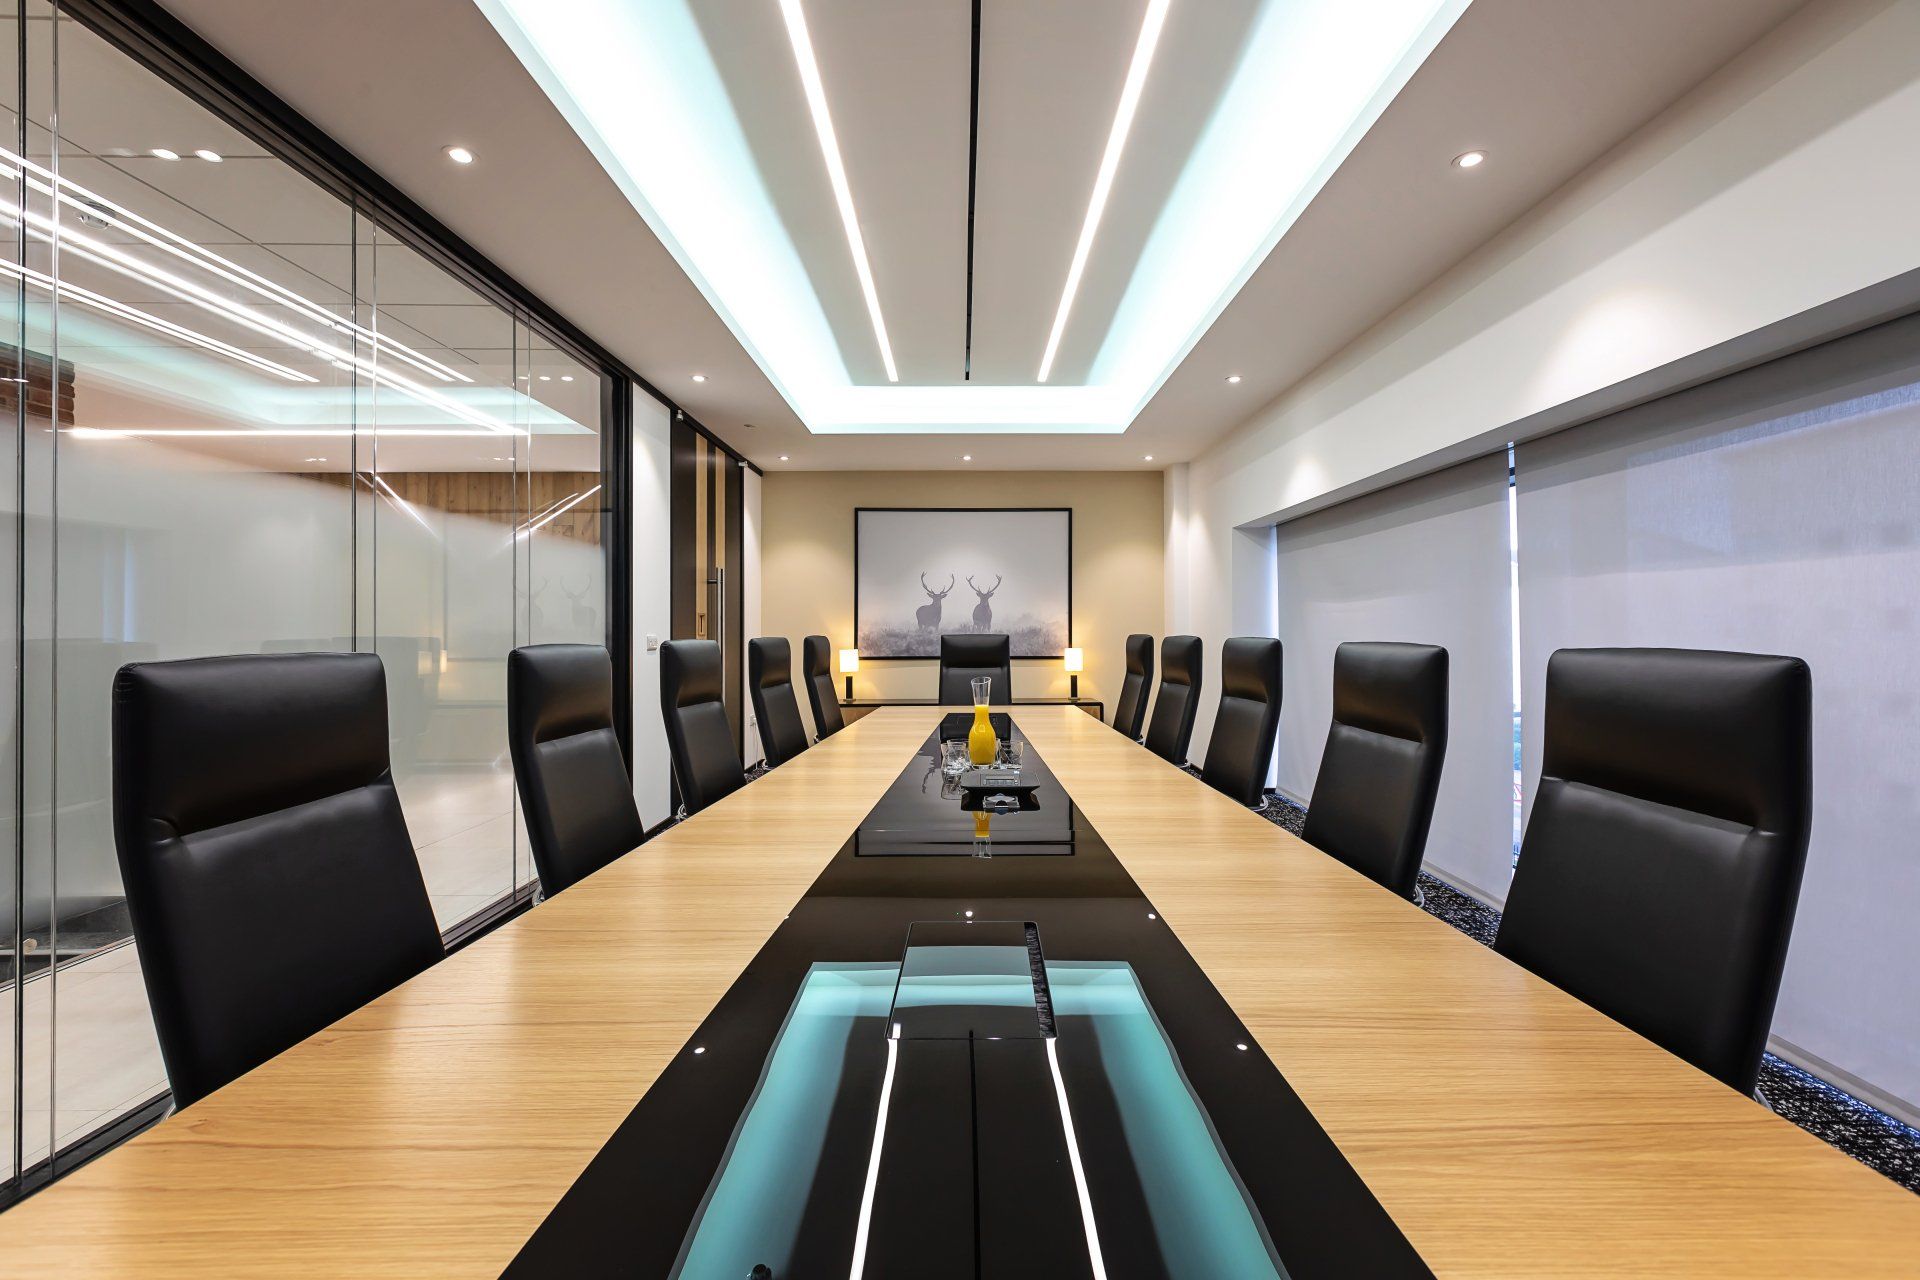 Large conference room table with overhead LED lighting